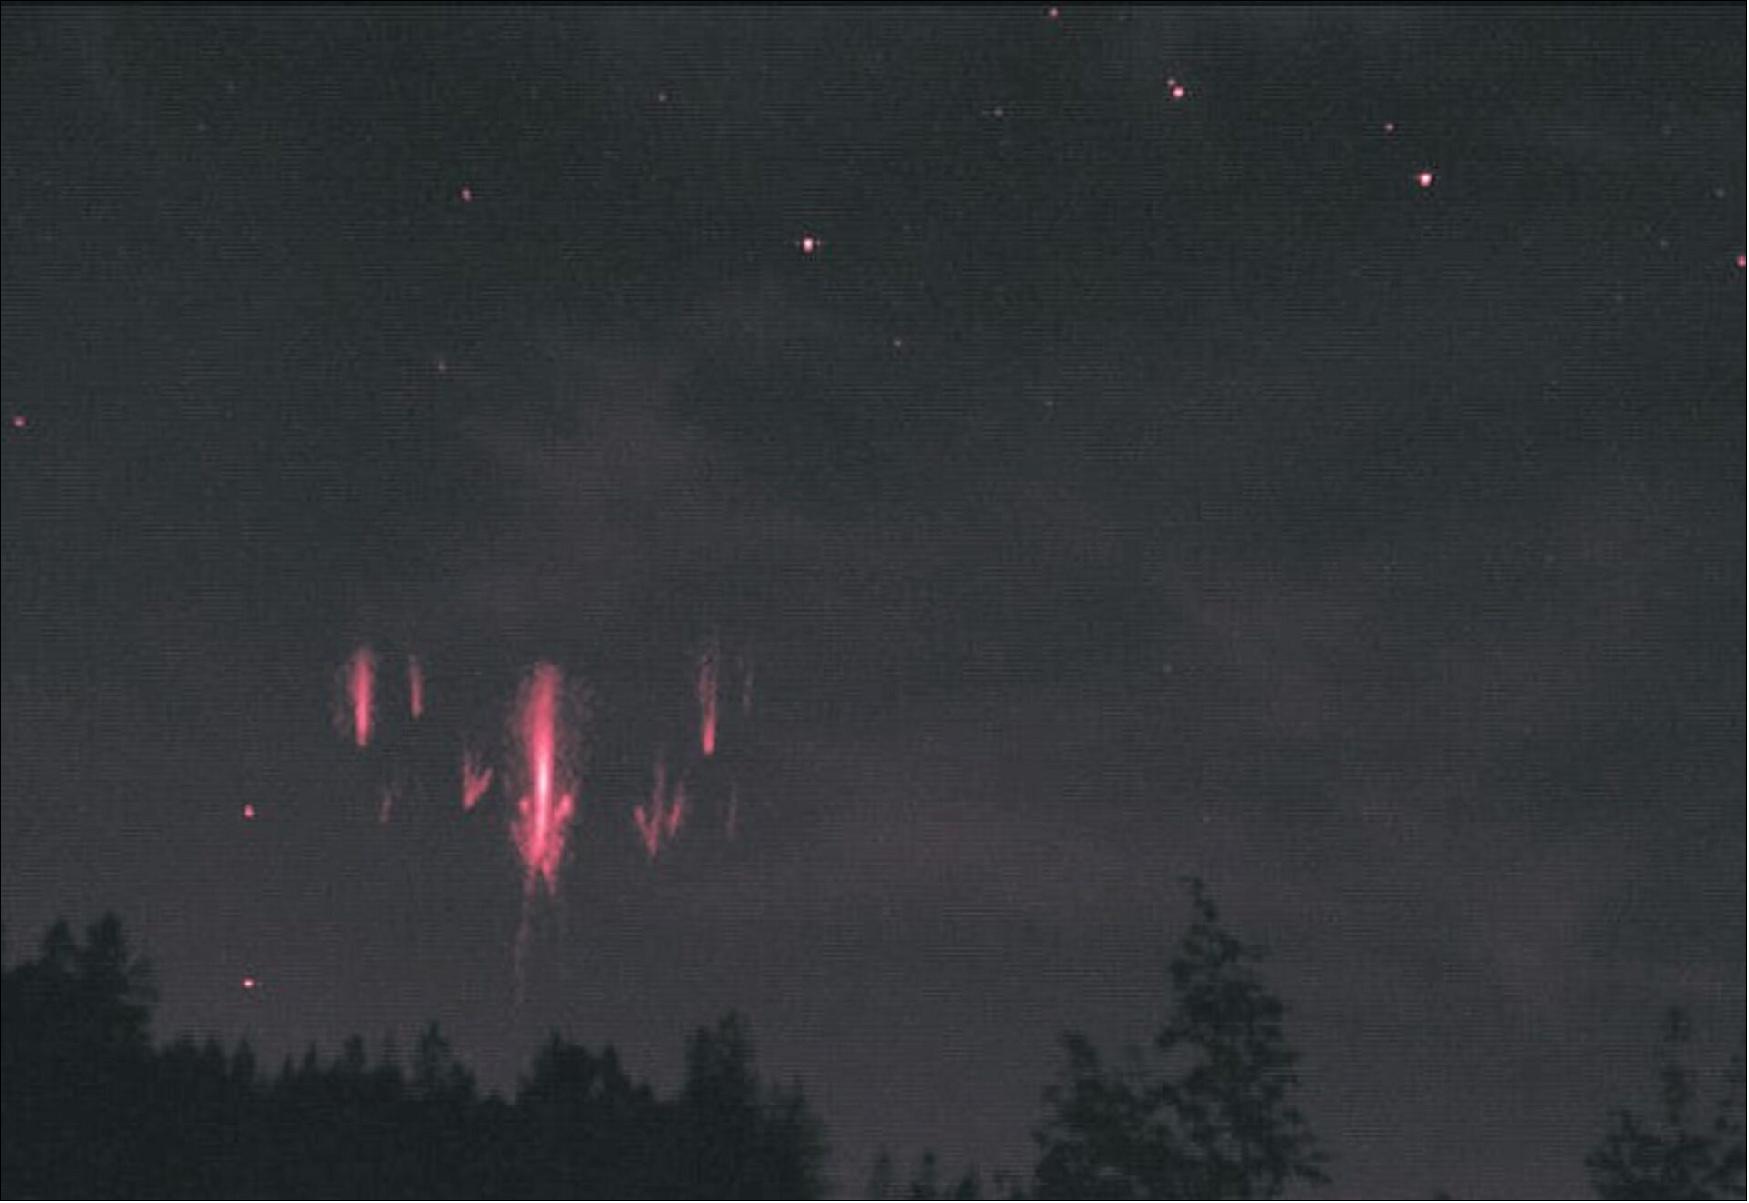 Figure 51: Sprites seen over the Czech Republic and detected by Swarm. This photograph of lightning sprites was taken from the Czech Republic in August 2017 and it was the first time that an event of this type left its signature simultaneously in satellite data. Two of ESA’s Swarm satellites registered perturbations in their magnetic field data as they passed over Poland. The distance between the ground tracks of the satellites and the center of the storm was about 500 km. The event caused fluctuations in the scalar magnetic field with amplitudes reaching 0.2 nT. Now a scientific paper has been published about using Swarm to help provide evidence of links between transient luminous events and magnetic-field fluctuations in the upper ionosphere (image credit: M. Popek) 65)